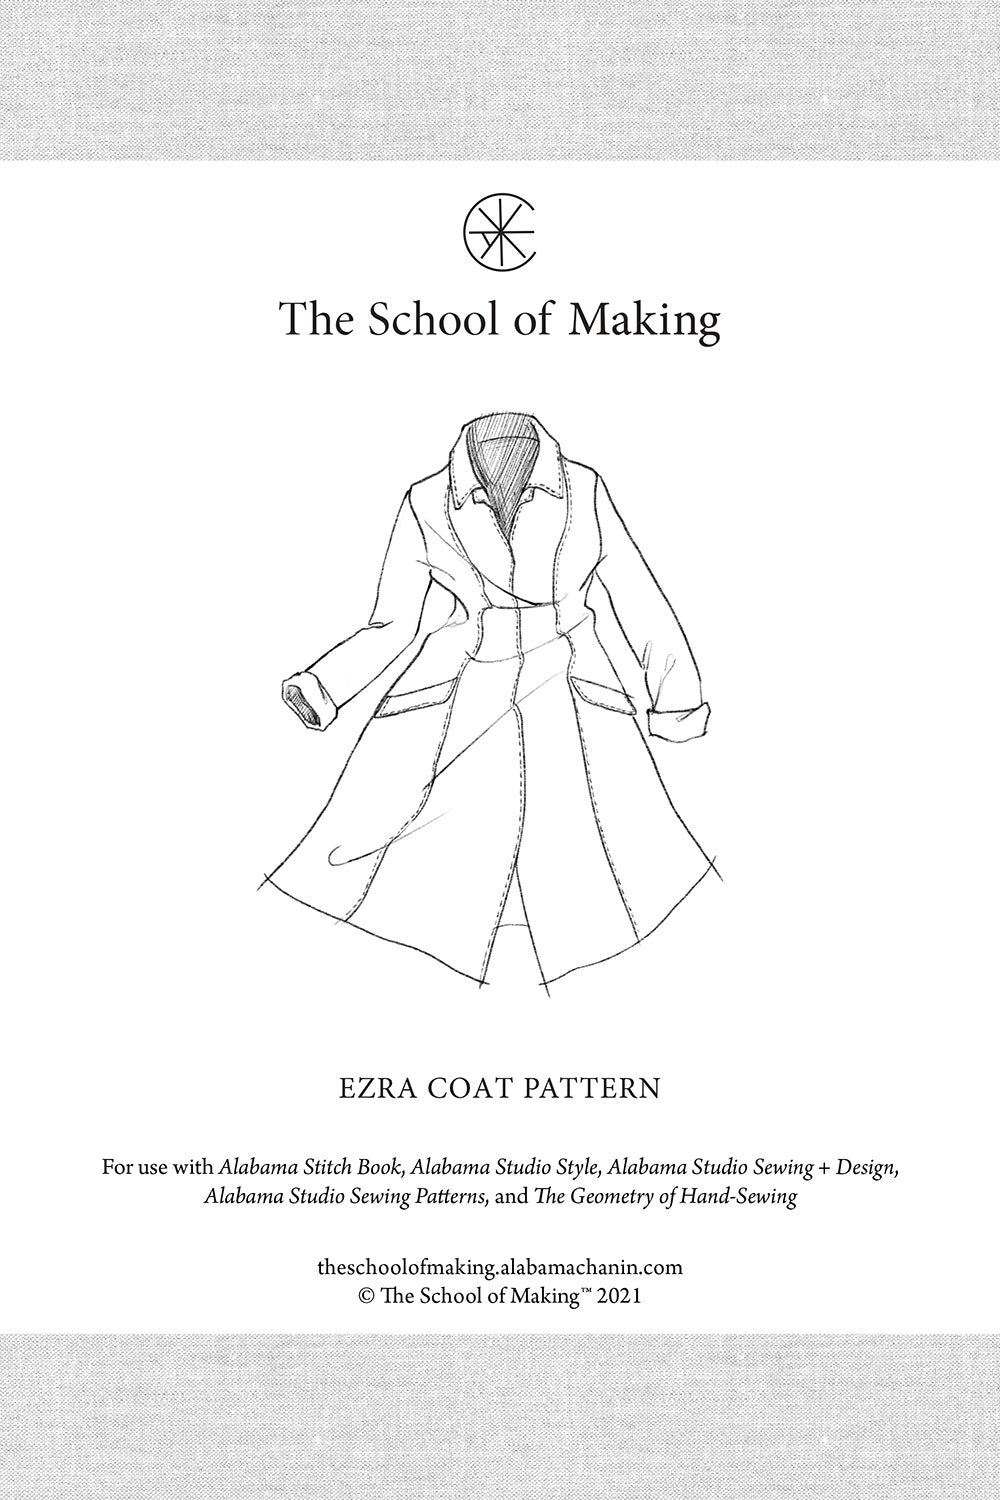 The School of Making Ezra Coat Pattern Maker Supplies for Hand-Sewing